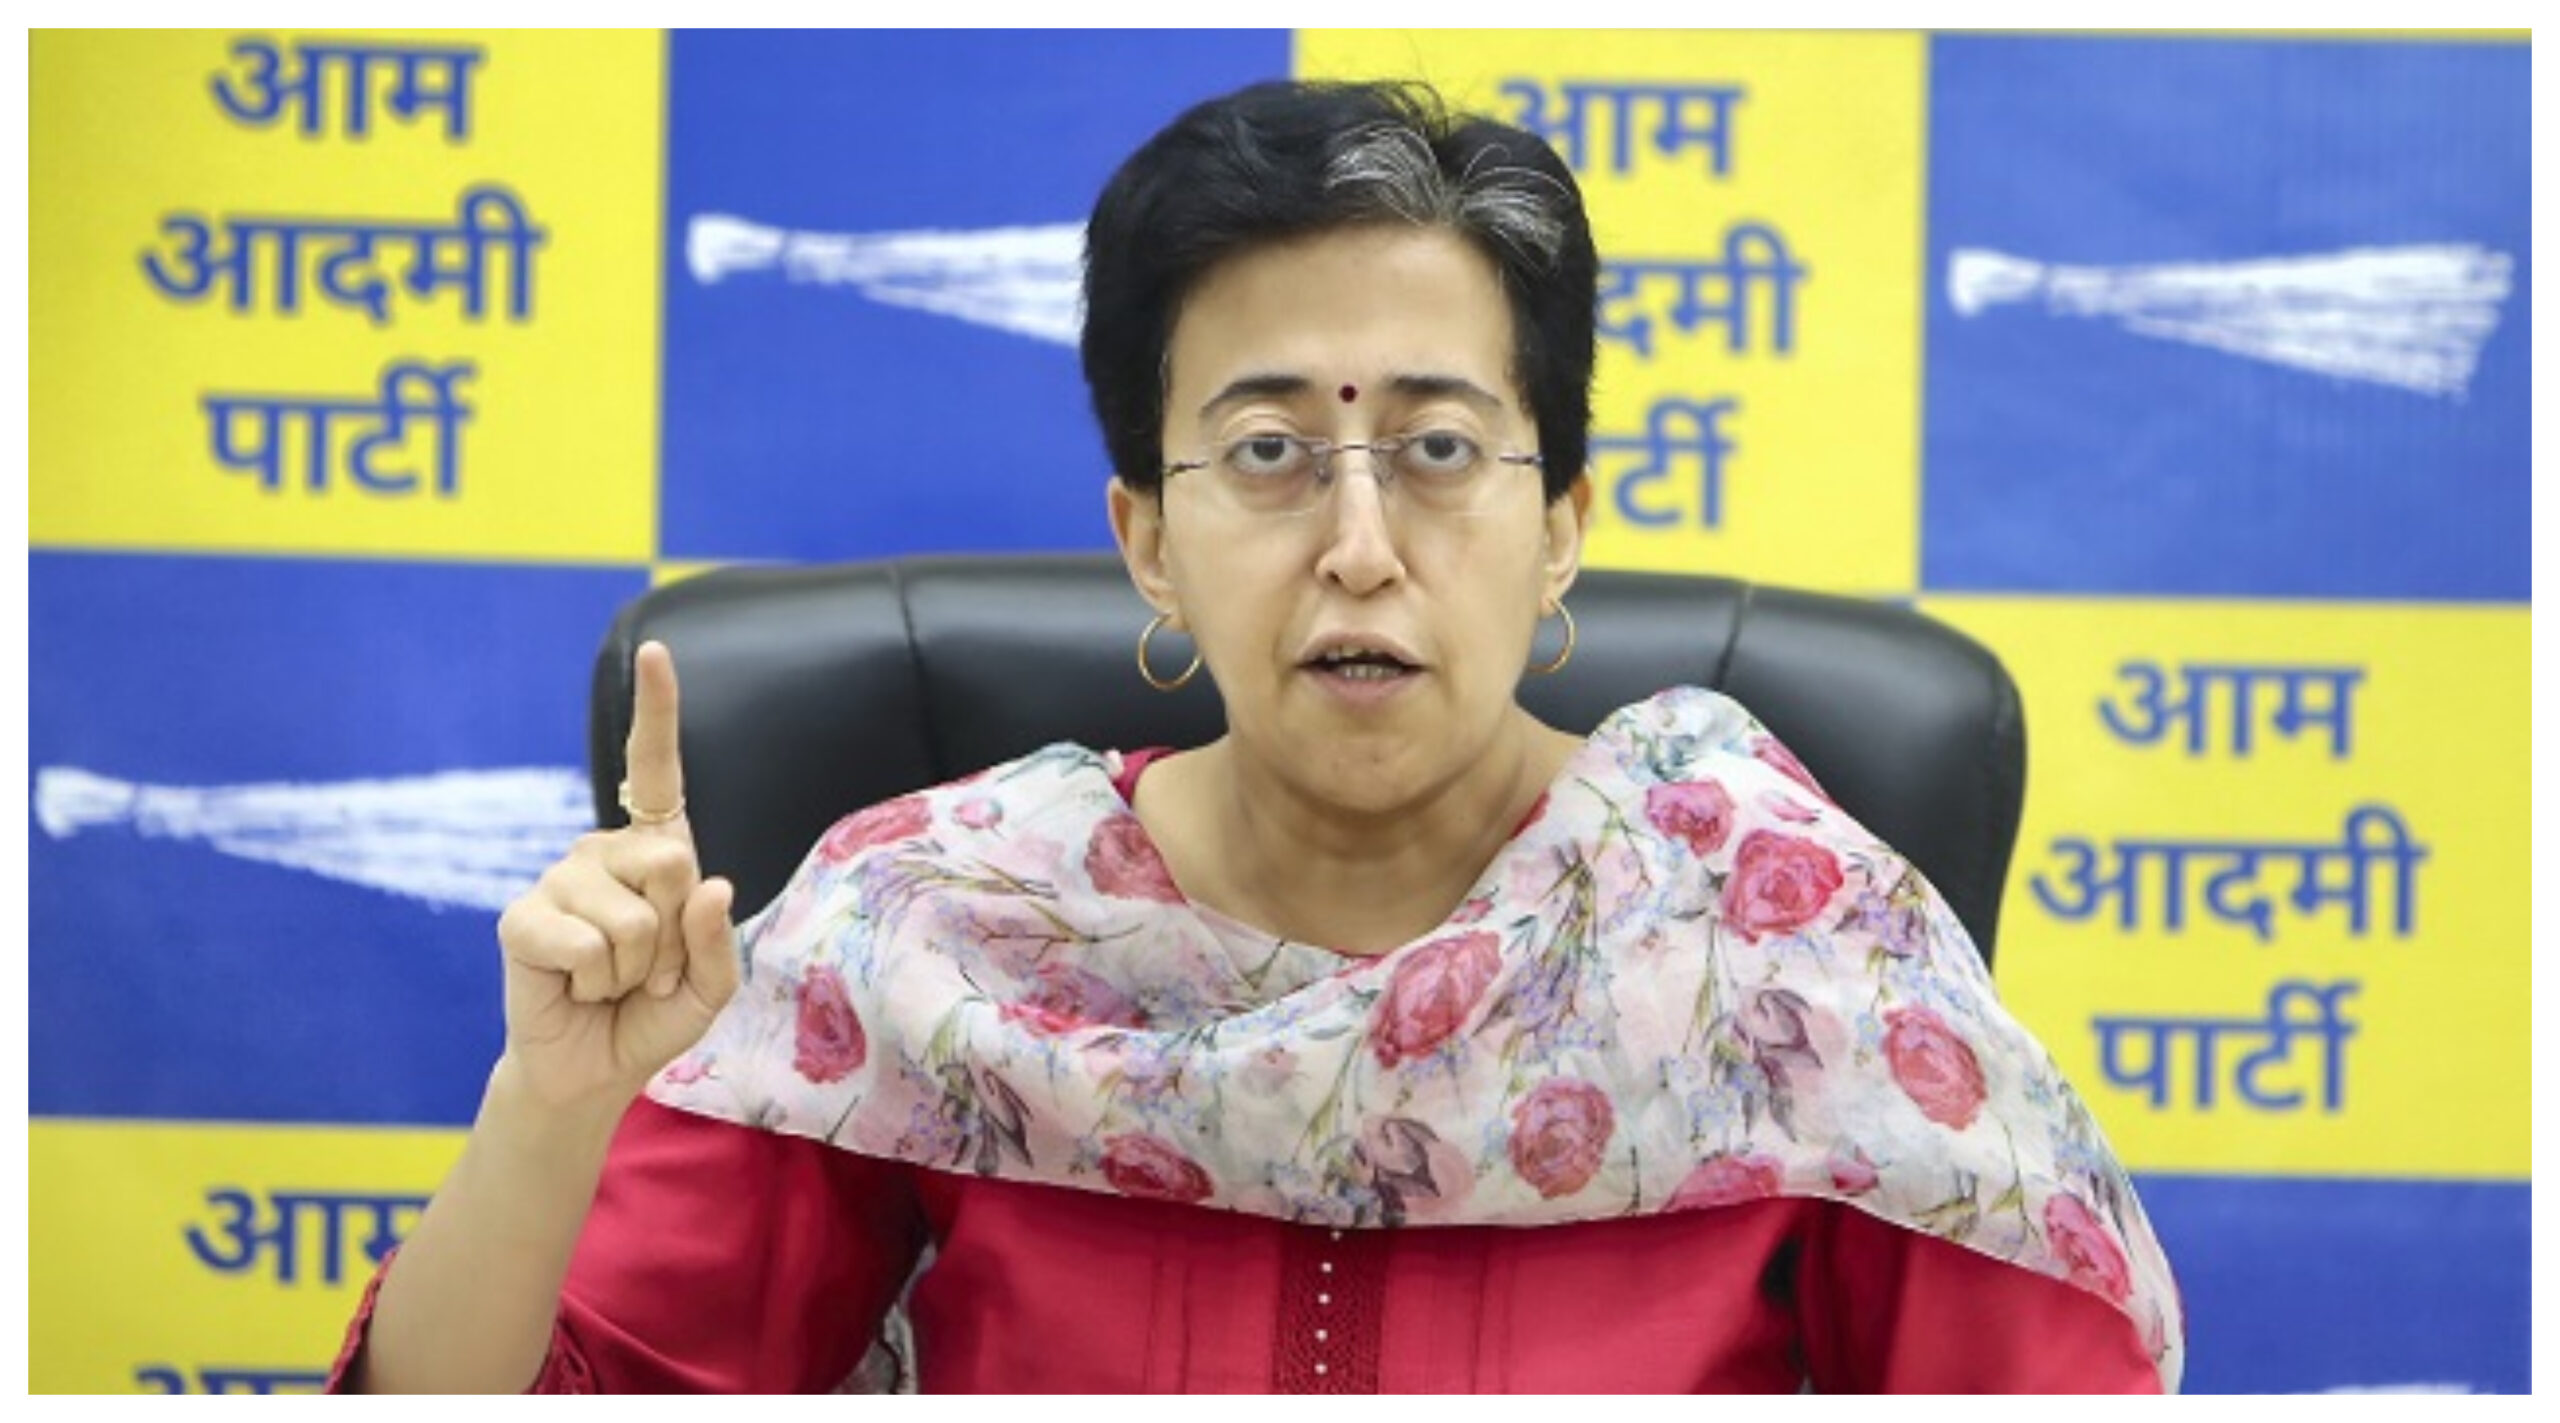 Delhi: AAP Minister Atishi said that till date ED has not found any trace of money with any AAP leader, aam admi party, political news in hindi, delhi news in hindi, delhi, aap, bjp, arvind kejriwal, aatishi, ED, kejriwal arrest, pm modi, lok sabha elections 2024totaltv news in hindi